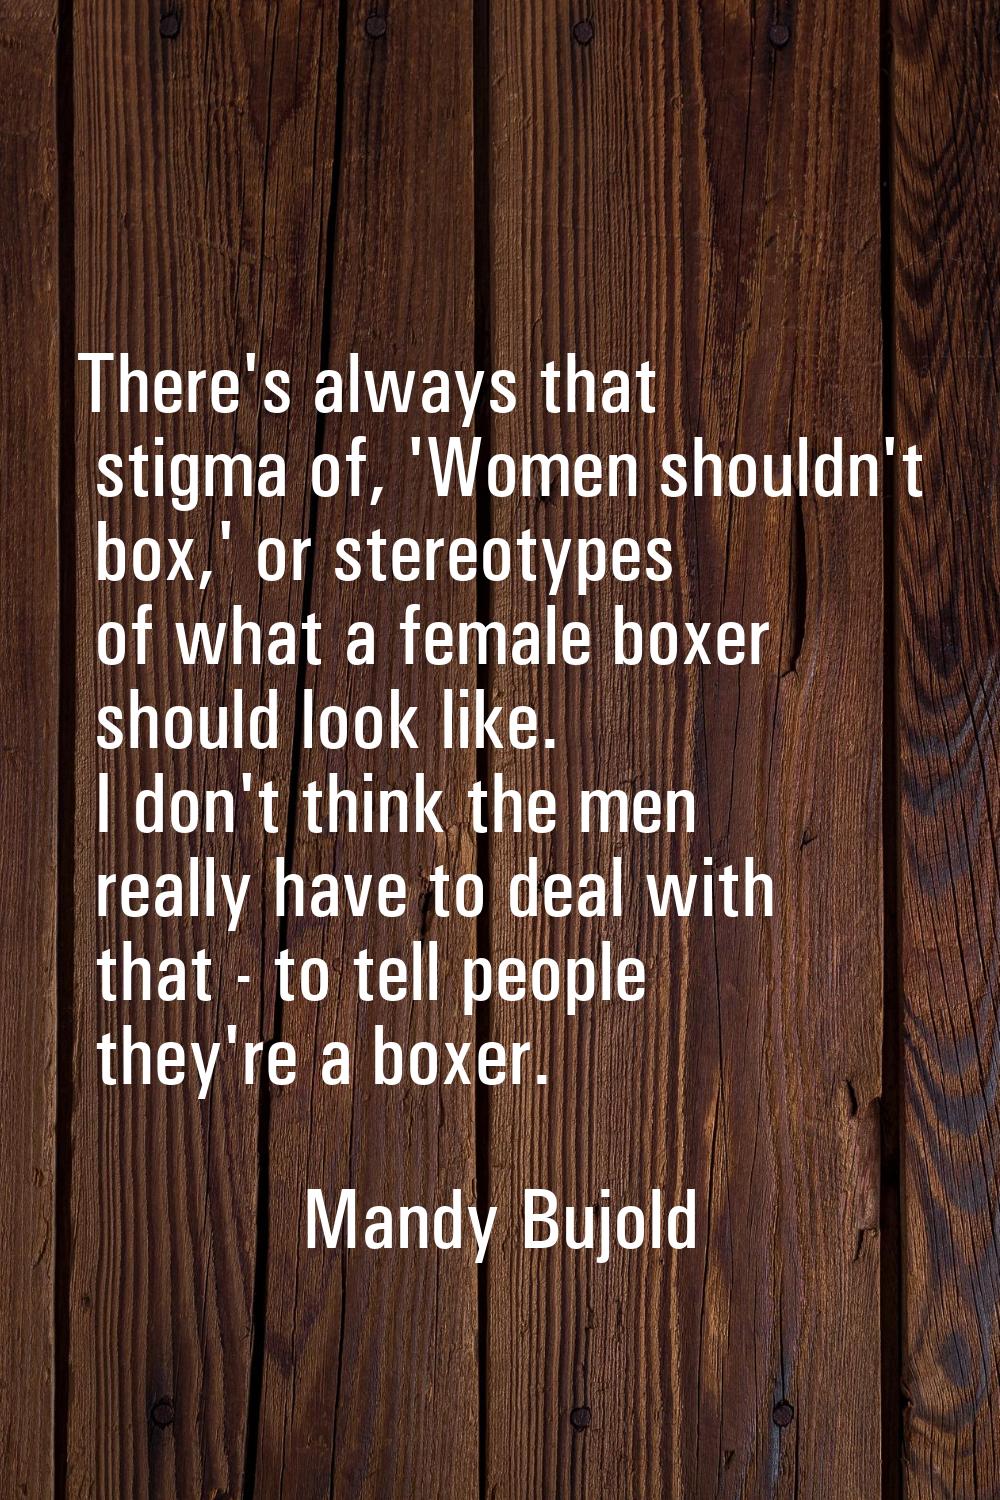 There's always that stigma of, 'Women shouldn't box,' or stereotypes of what a female boxer should 